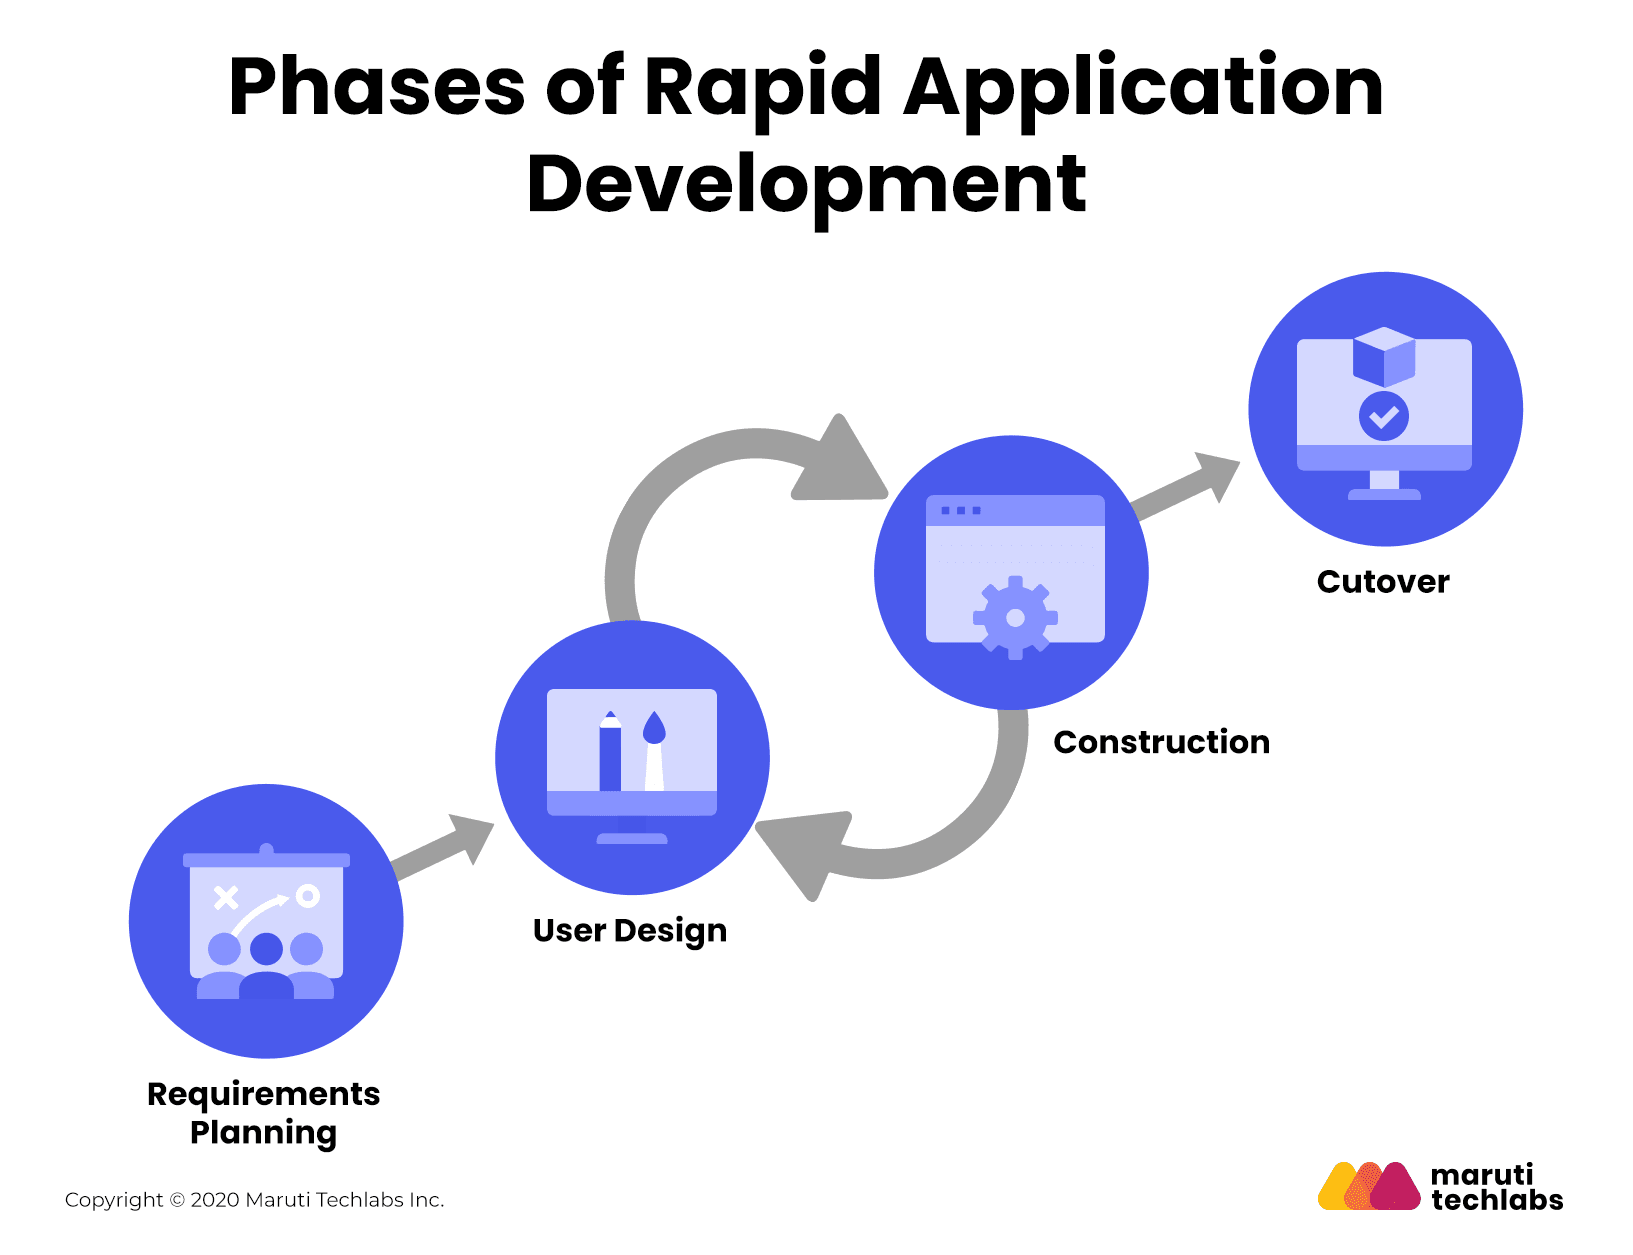 4 phases of rapid application development modelRequirement Planning